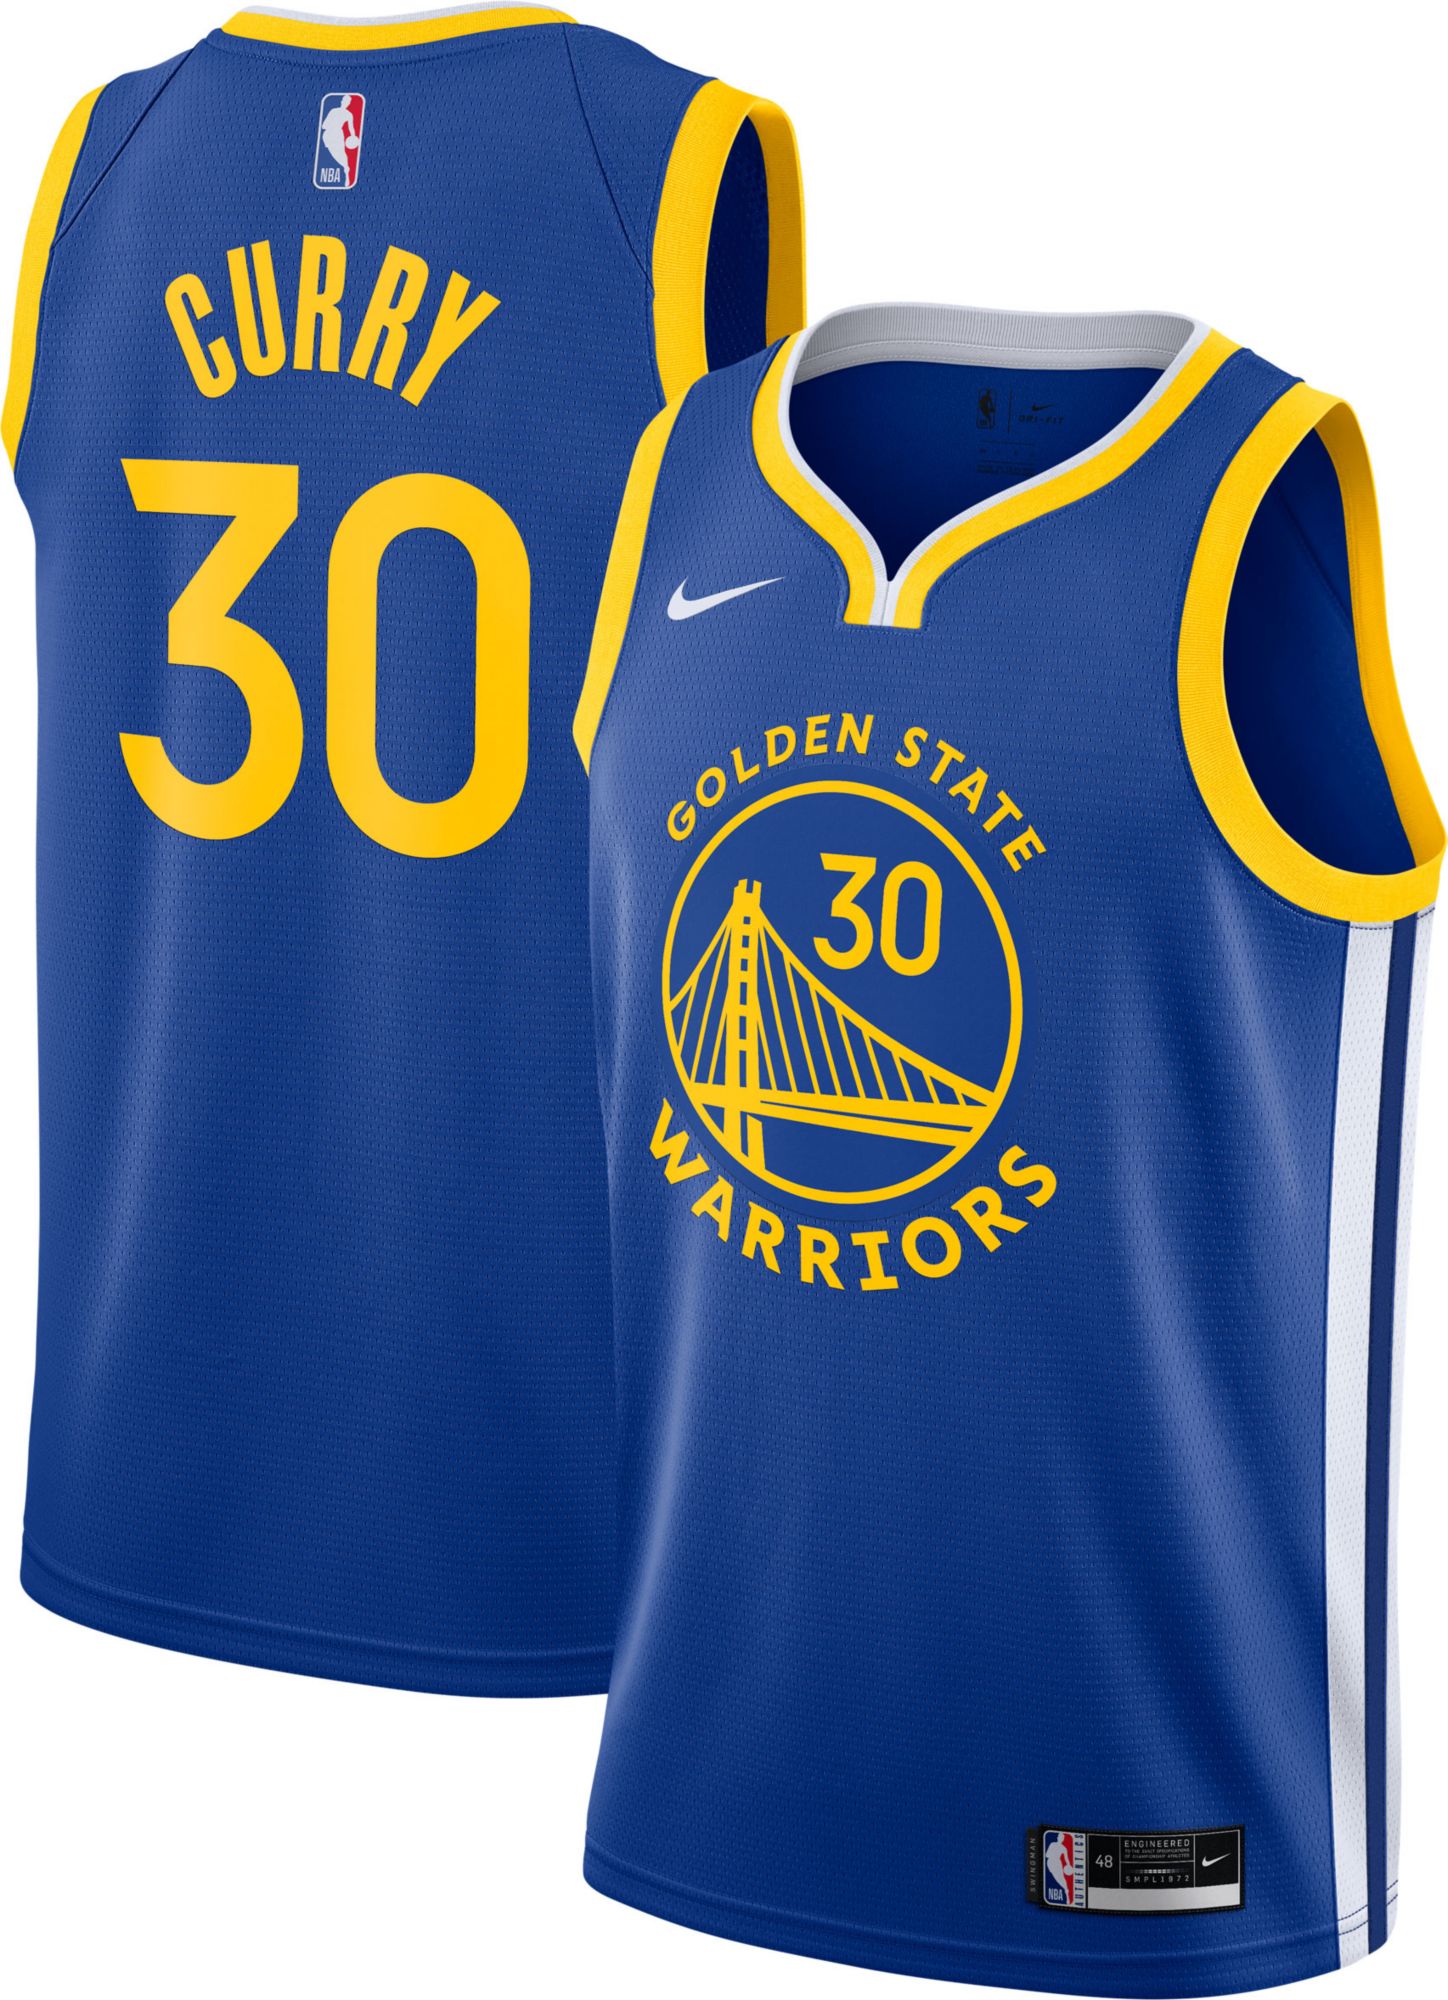 curry jersey price